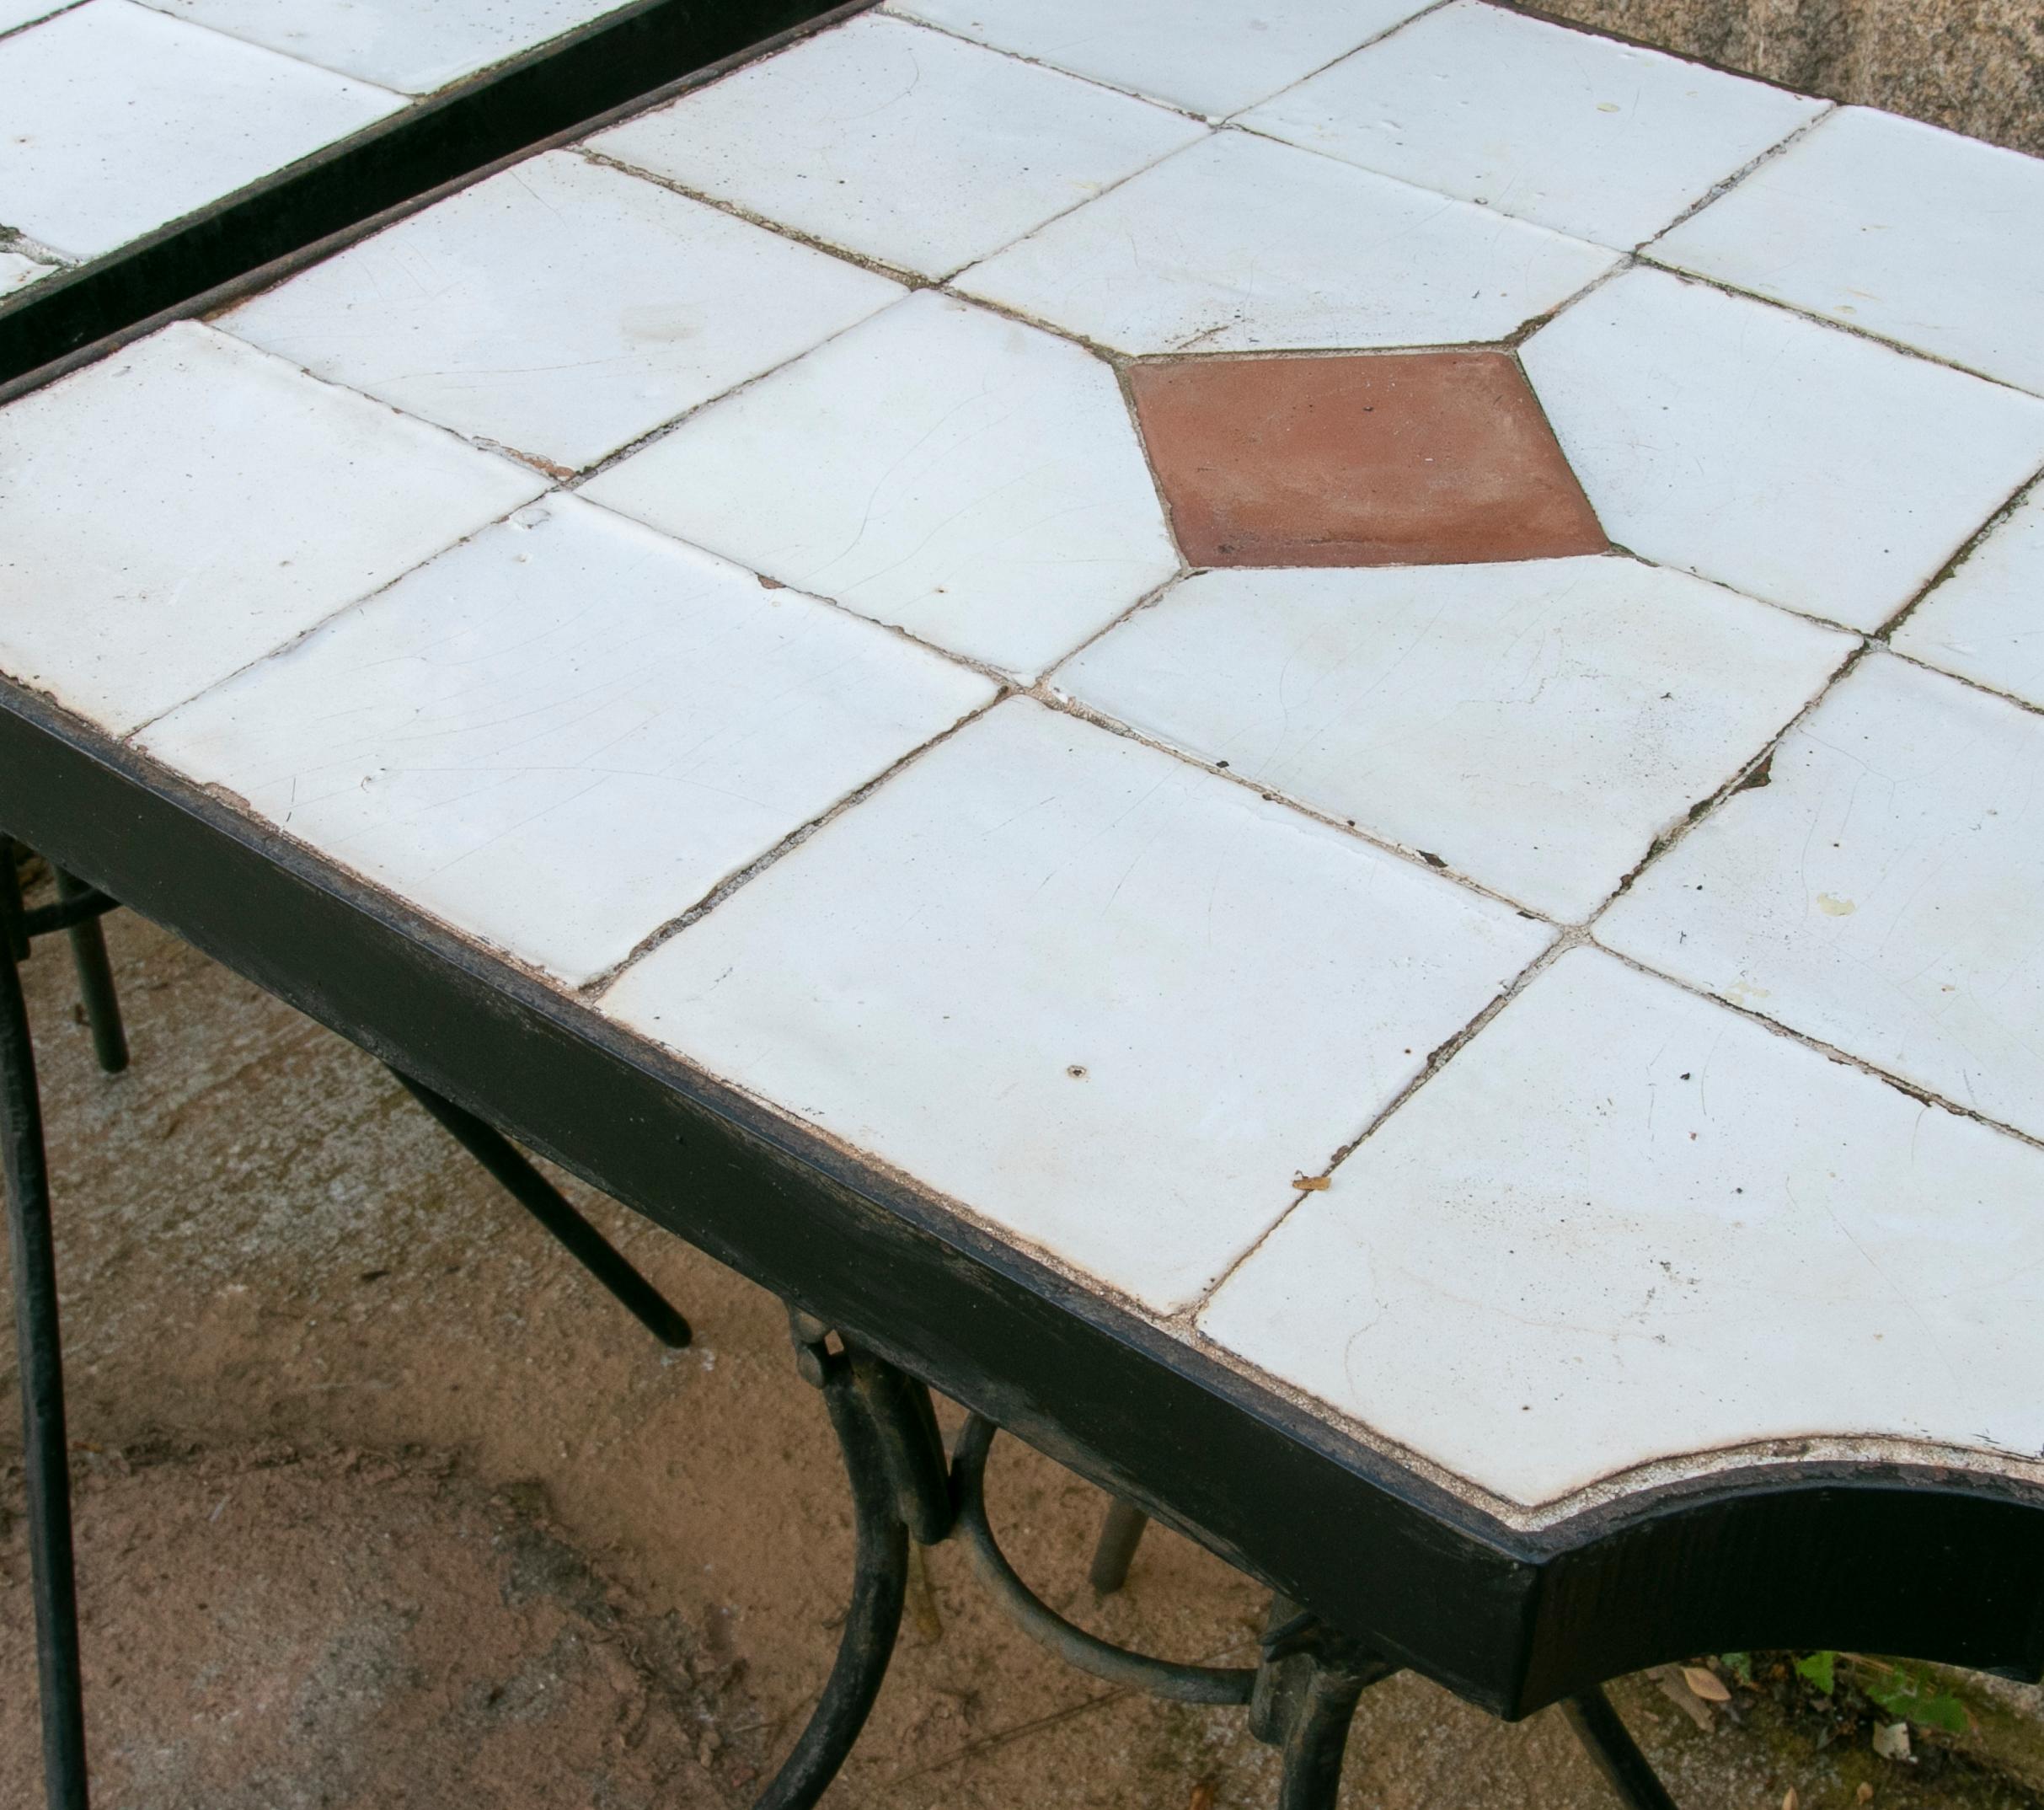 Ceramic 1980s Pair of Tables with Iron Base and Geometrical Tiles on Top